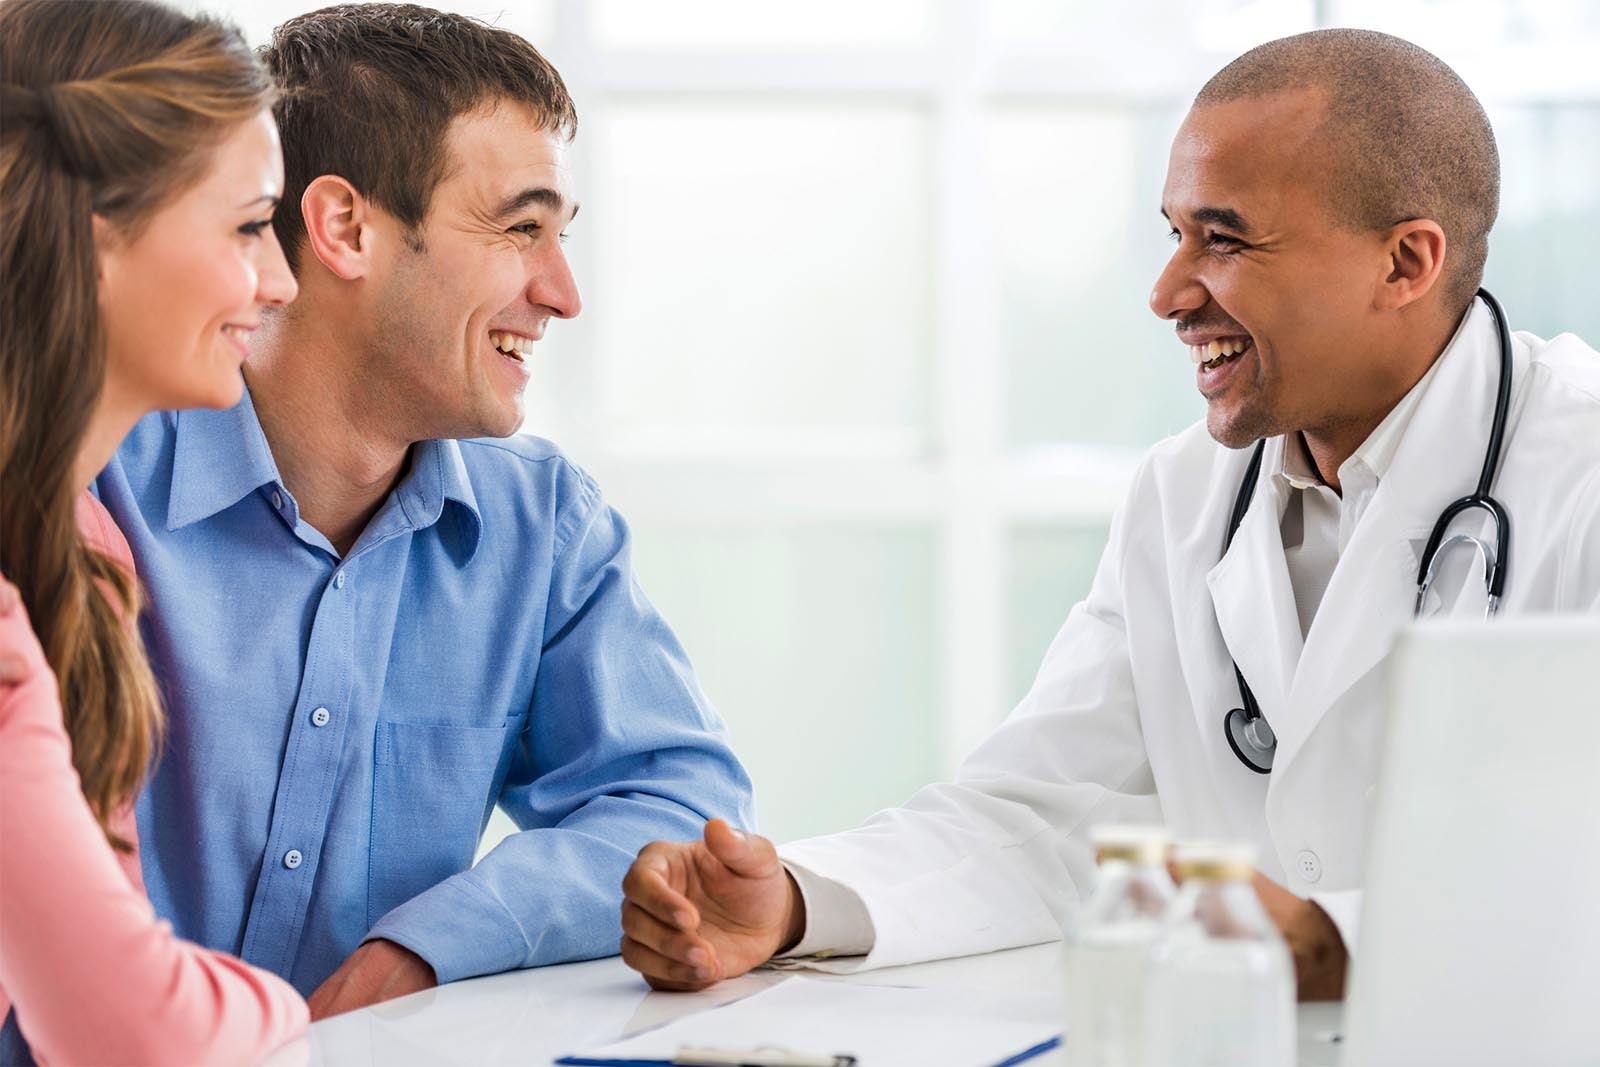 A male doctor having conversation with patients, all smiling.